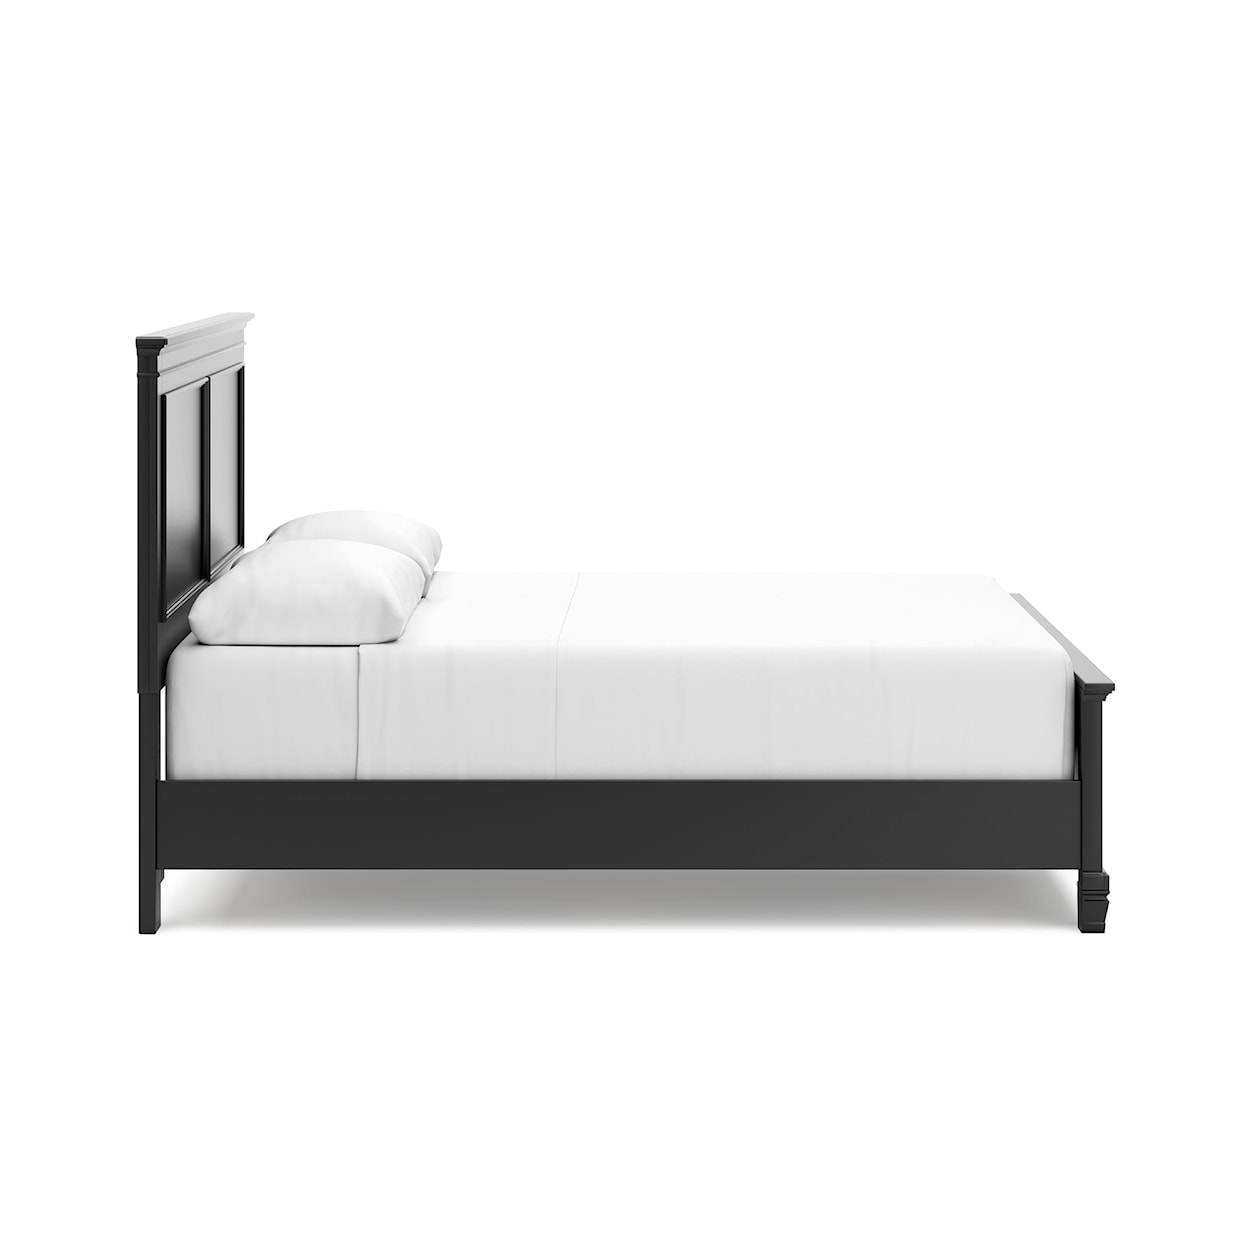 Signature Design by Ashley Furniture Lanolee Queen Panel Bed